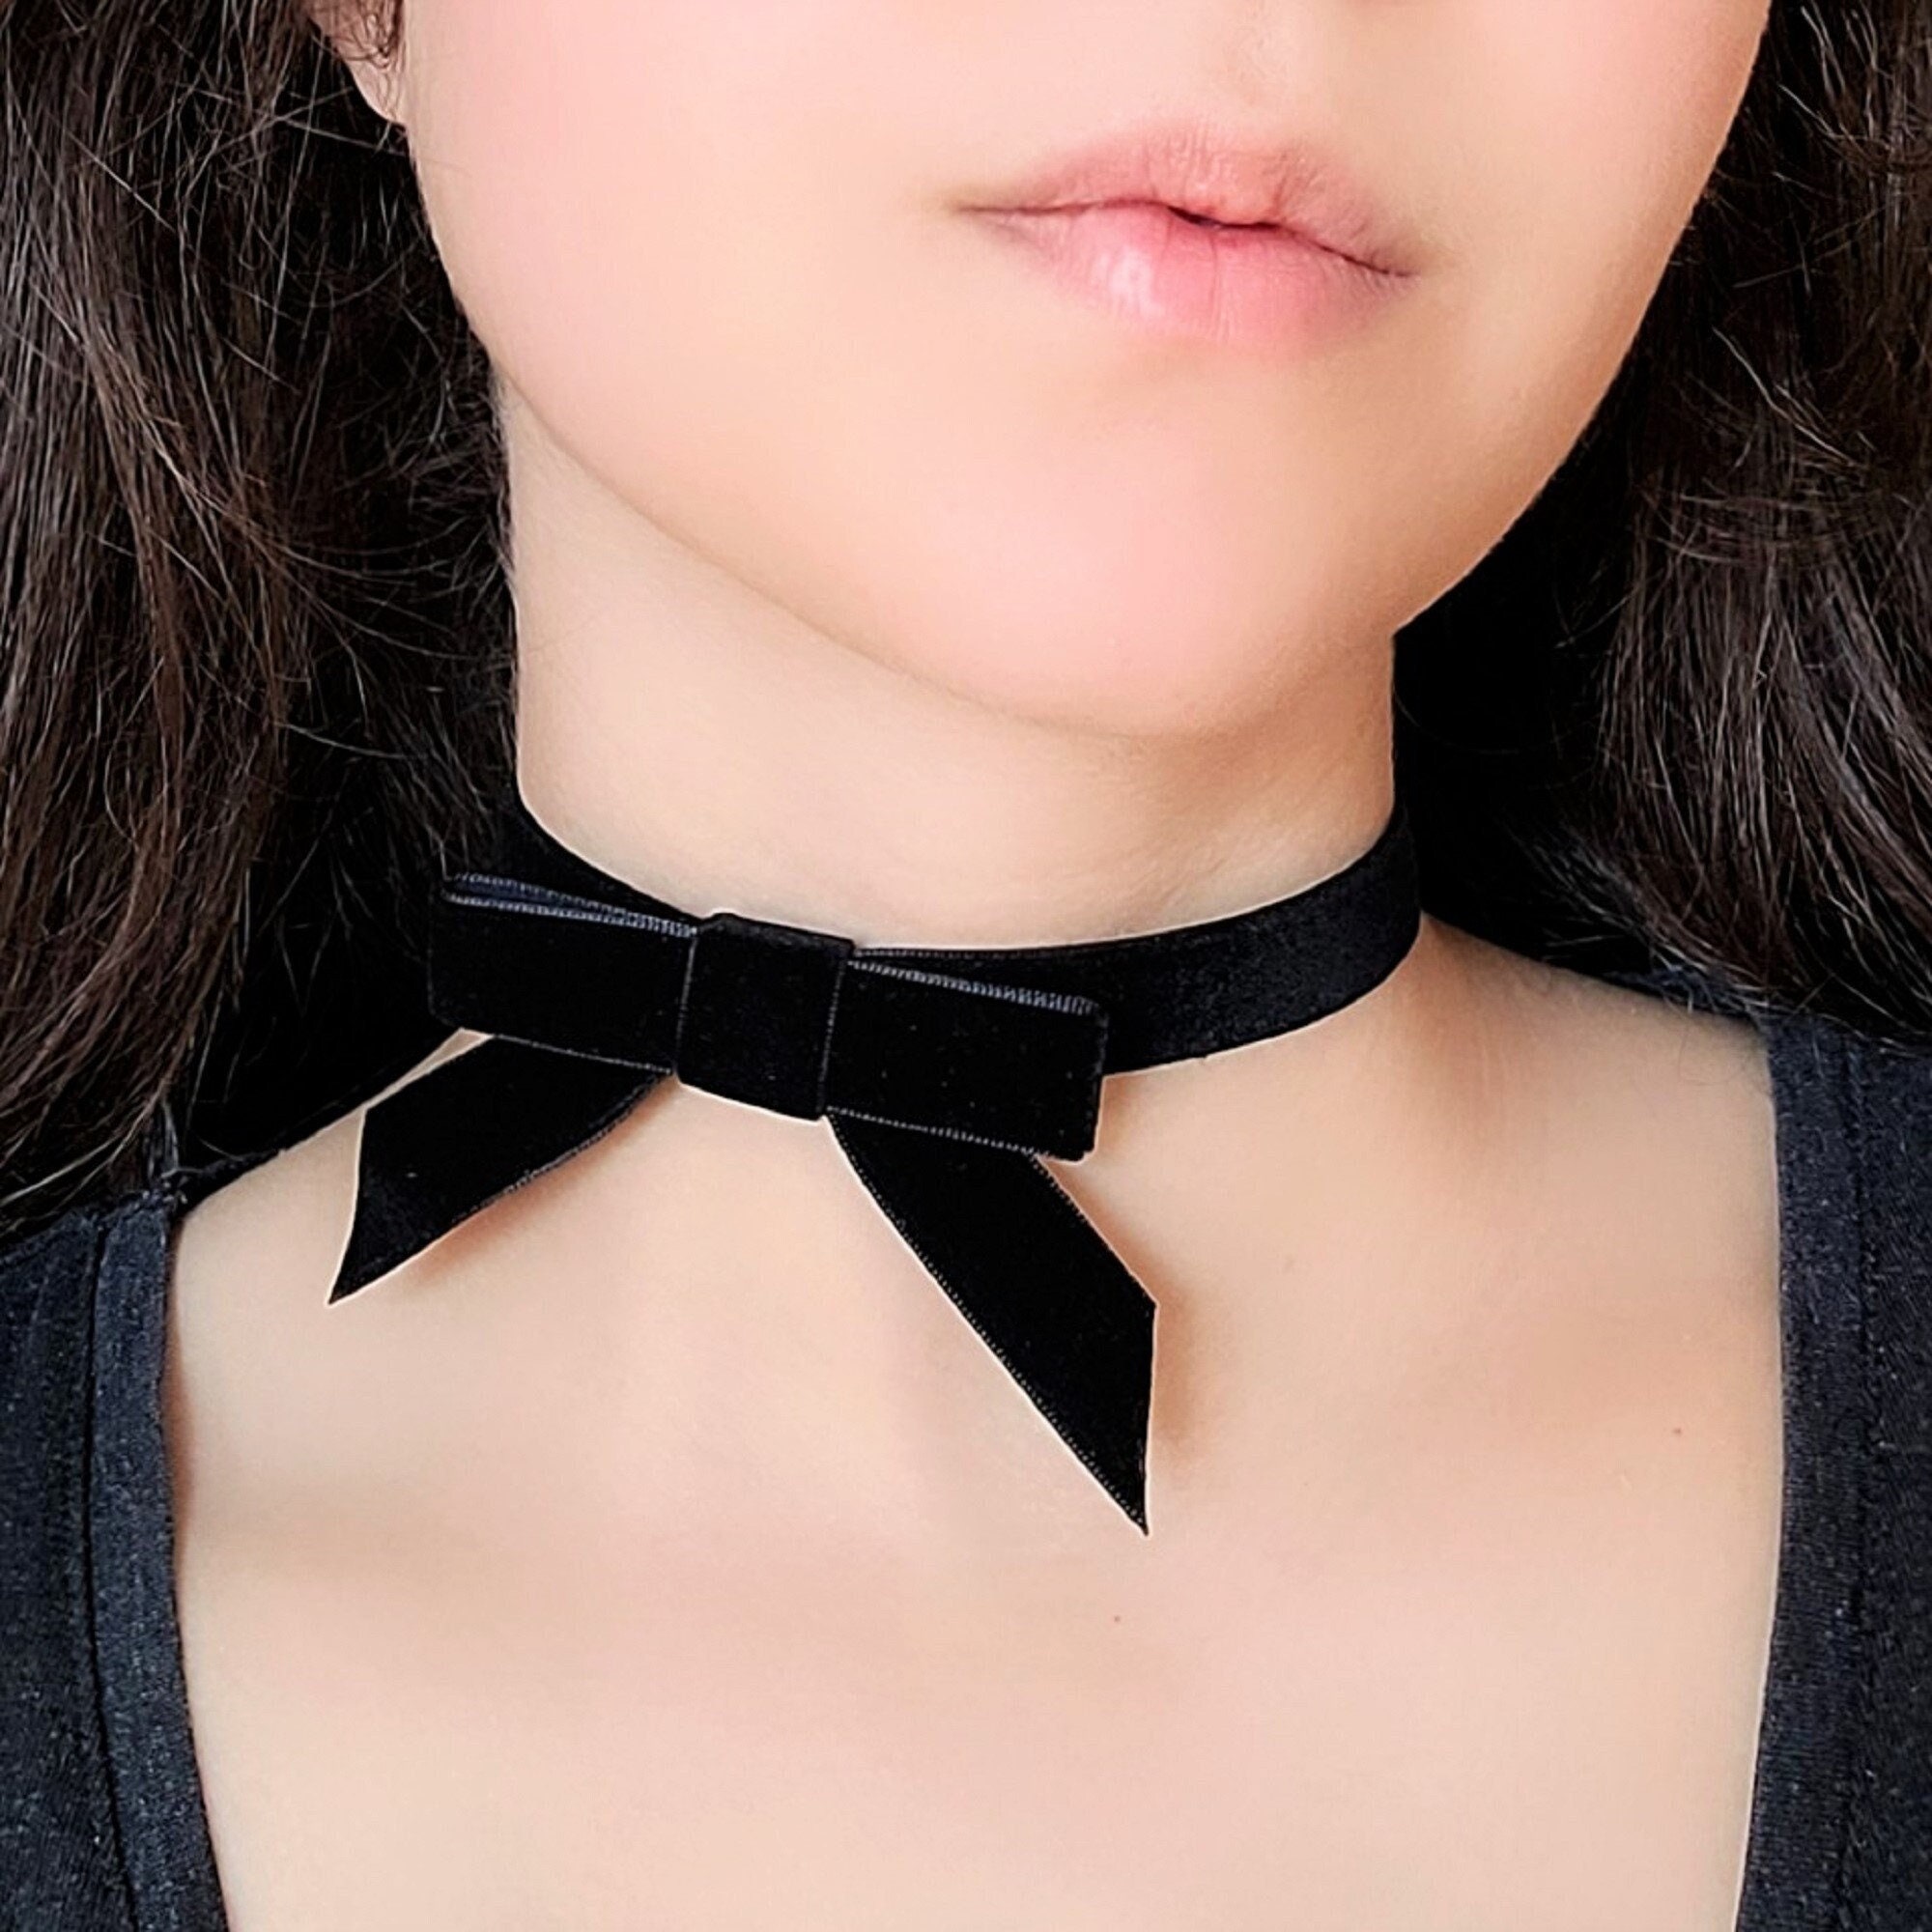 NEW Handmade Starling Bow Coquette Necklace/Choker